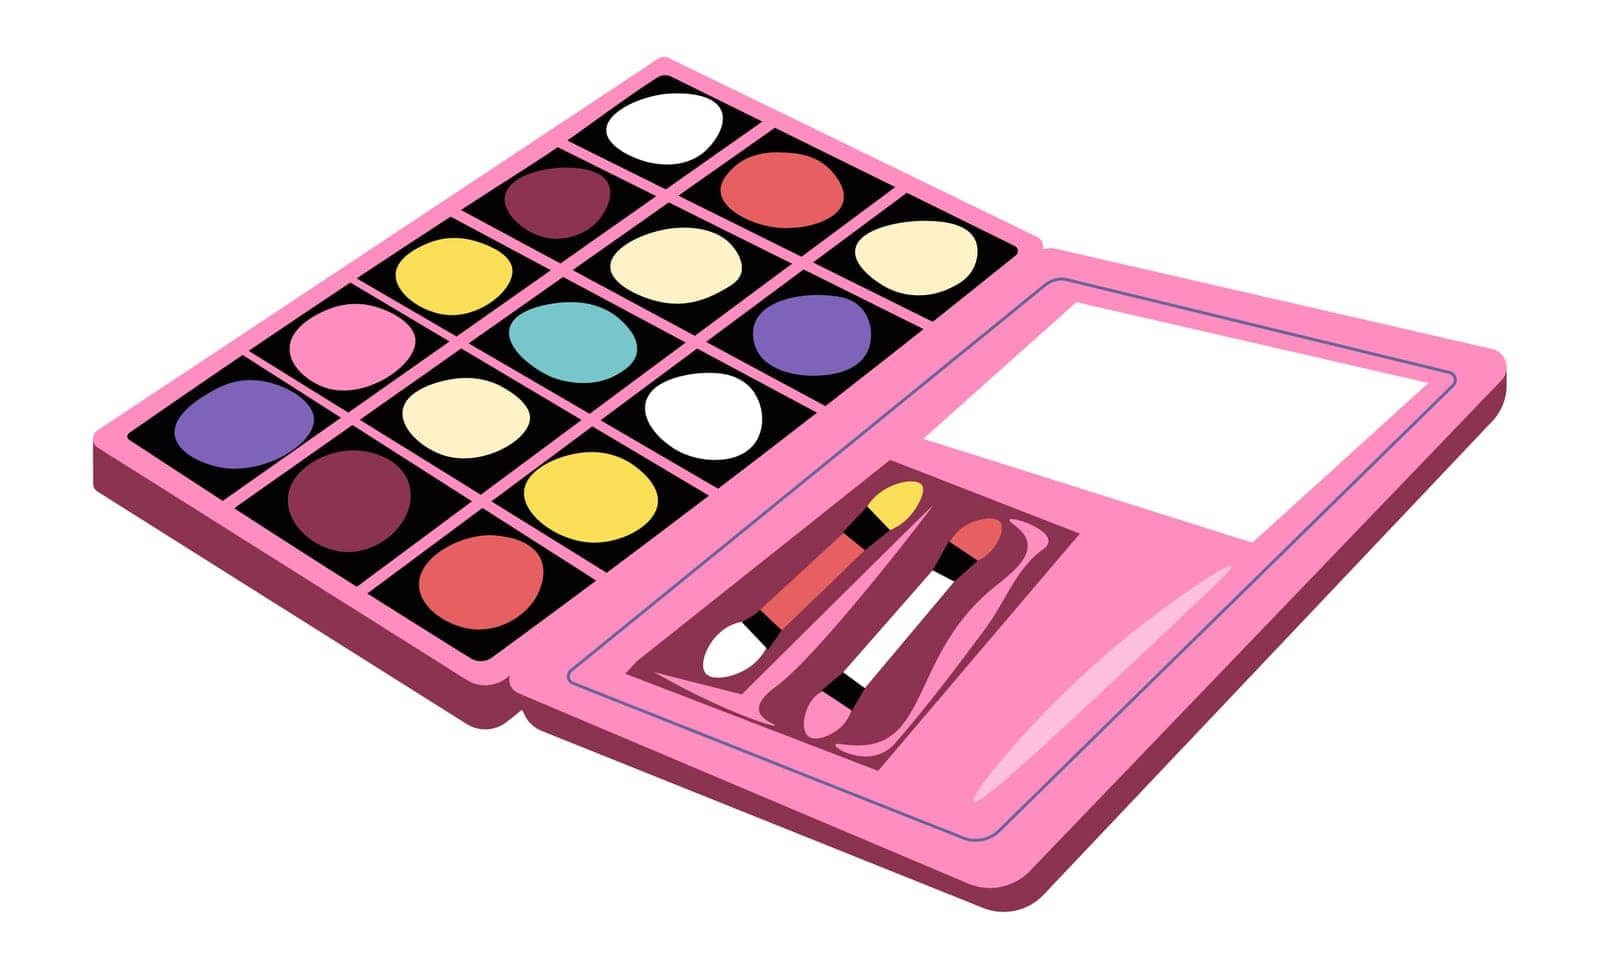 Cosmetics and products for make up, isolated palette of shades for eyes and cheeks. Package with mirror and brushes, applicator for applying. Beauty salon procedures and care. Vector in flat style